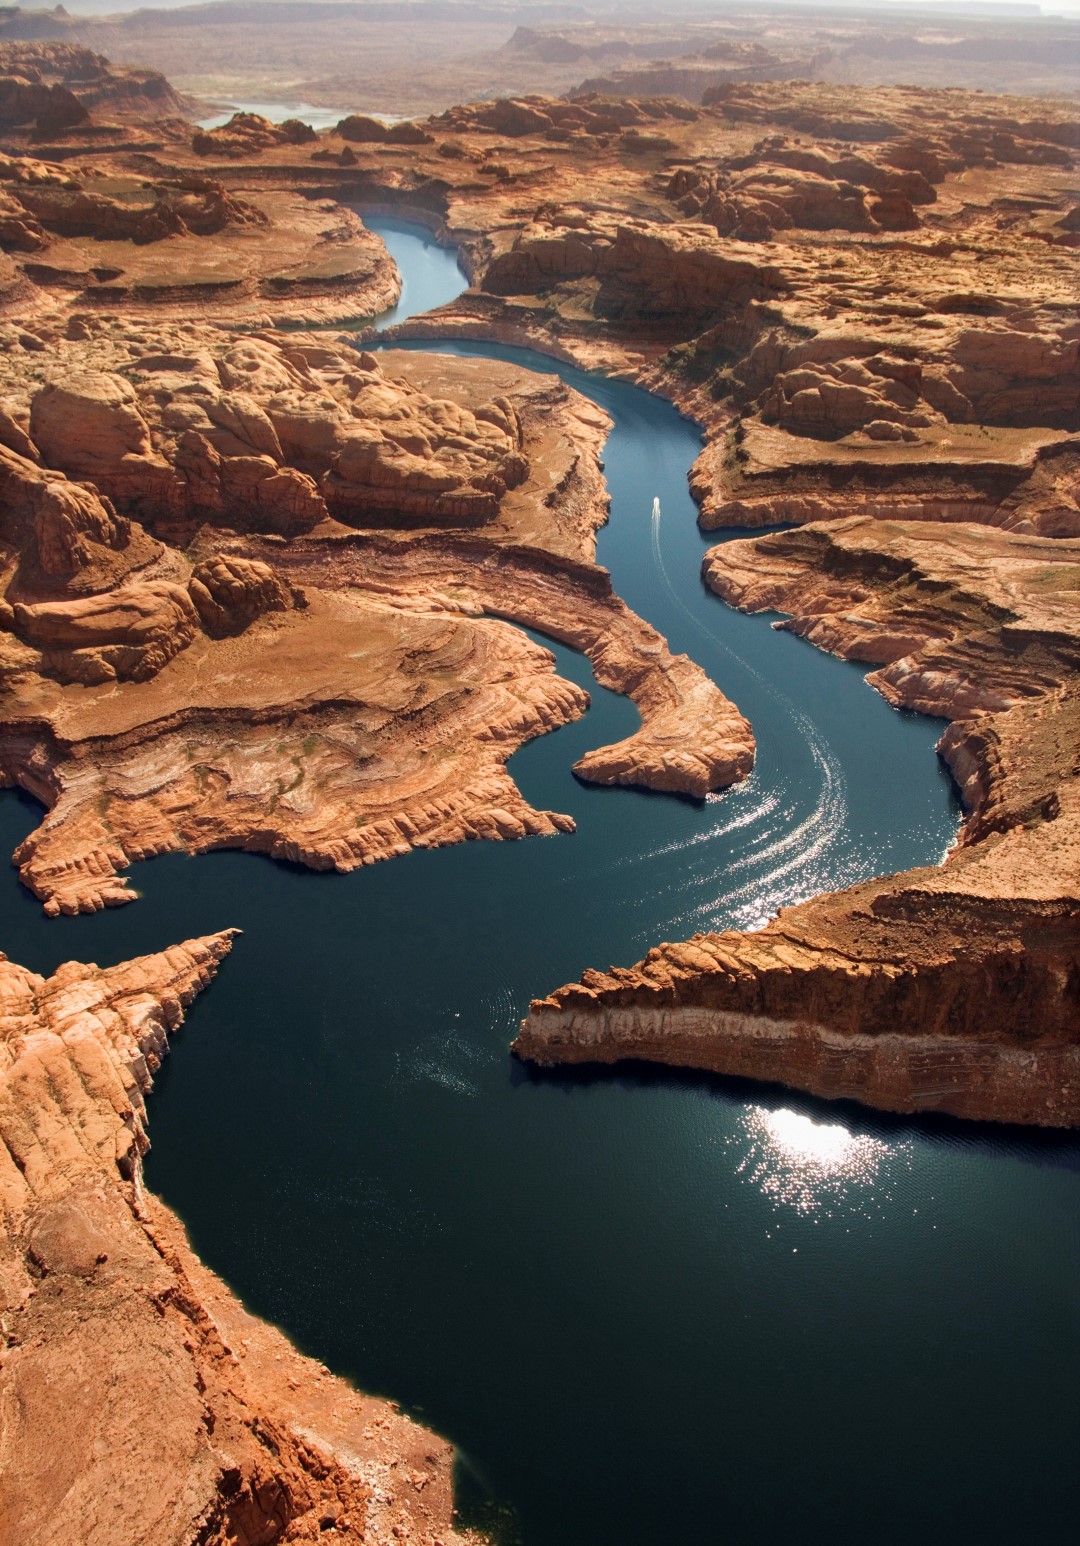 Lake Powell, the reservoir that fills Glen Canyon, is a long, sinuous waterway surrounded by Navajo Sandstone. Photo courtesy Kane County Tourism.